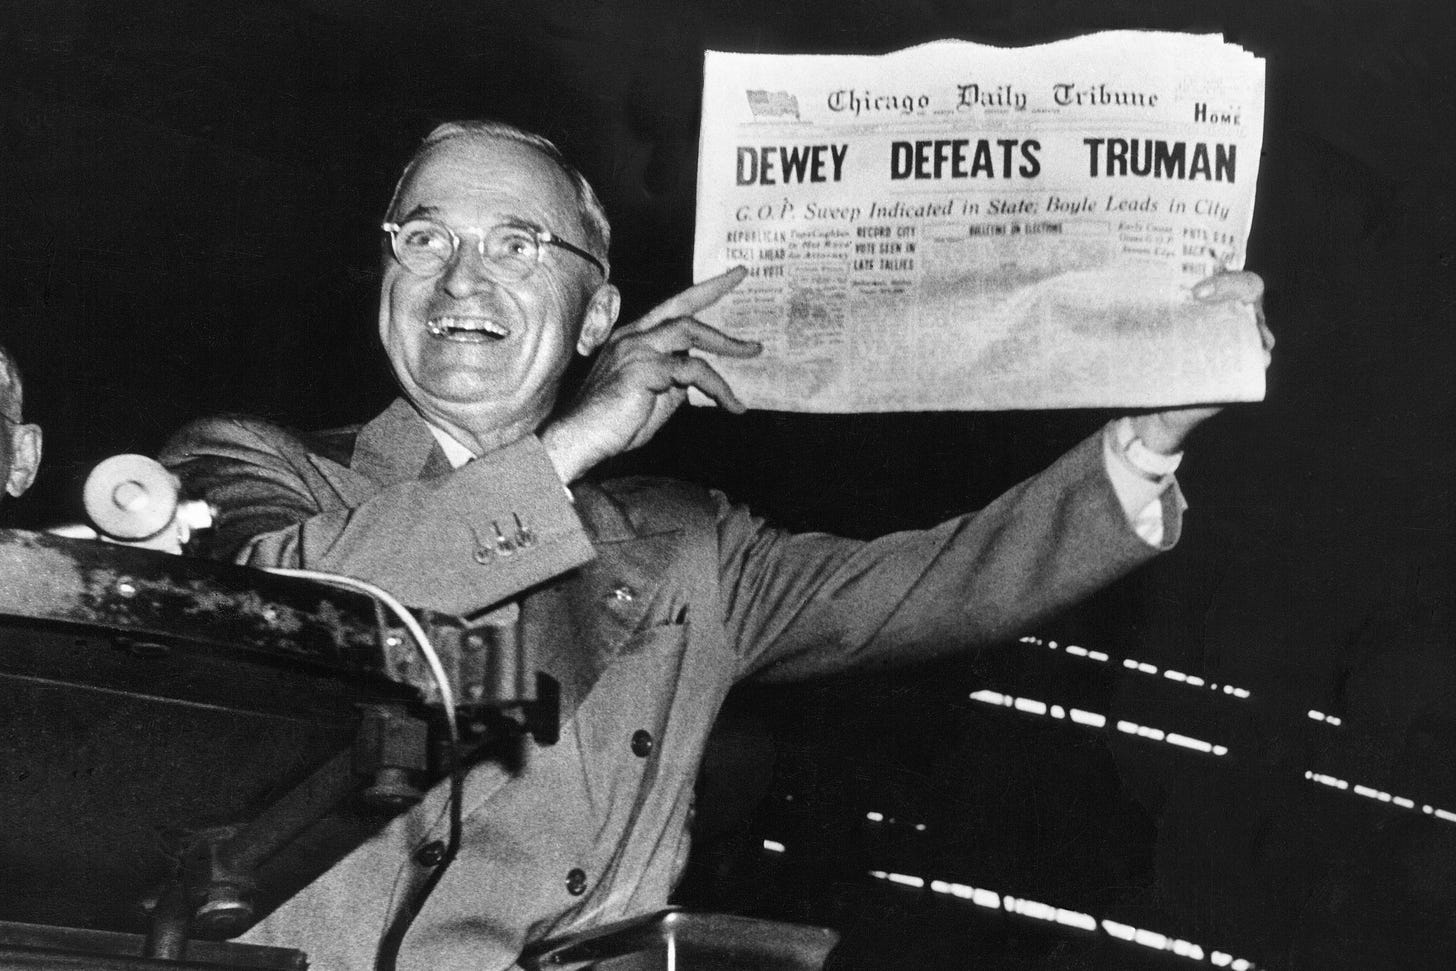 Dewey defeats Truman': Why the 1948 election matters in 2020 | Fortune